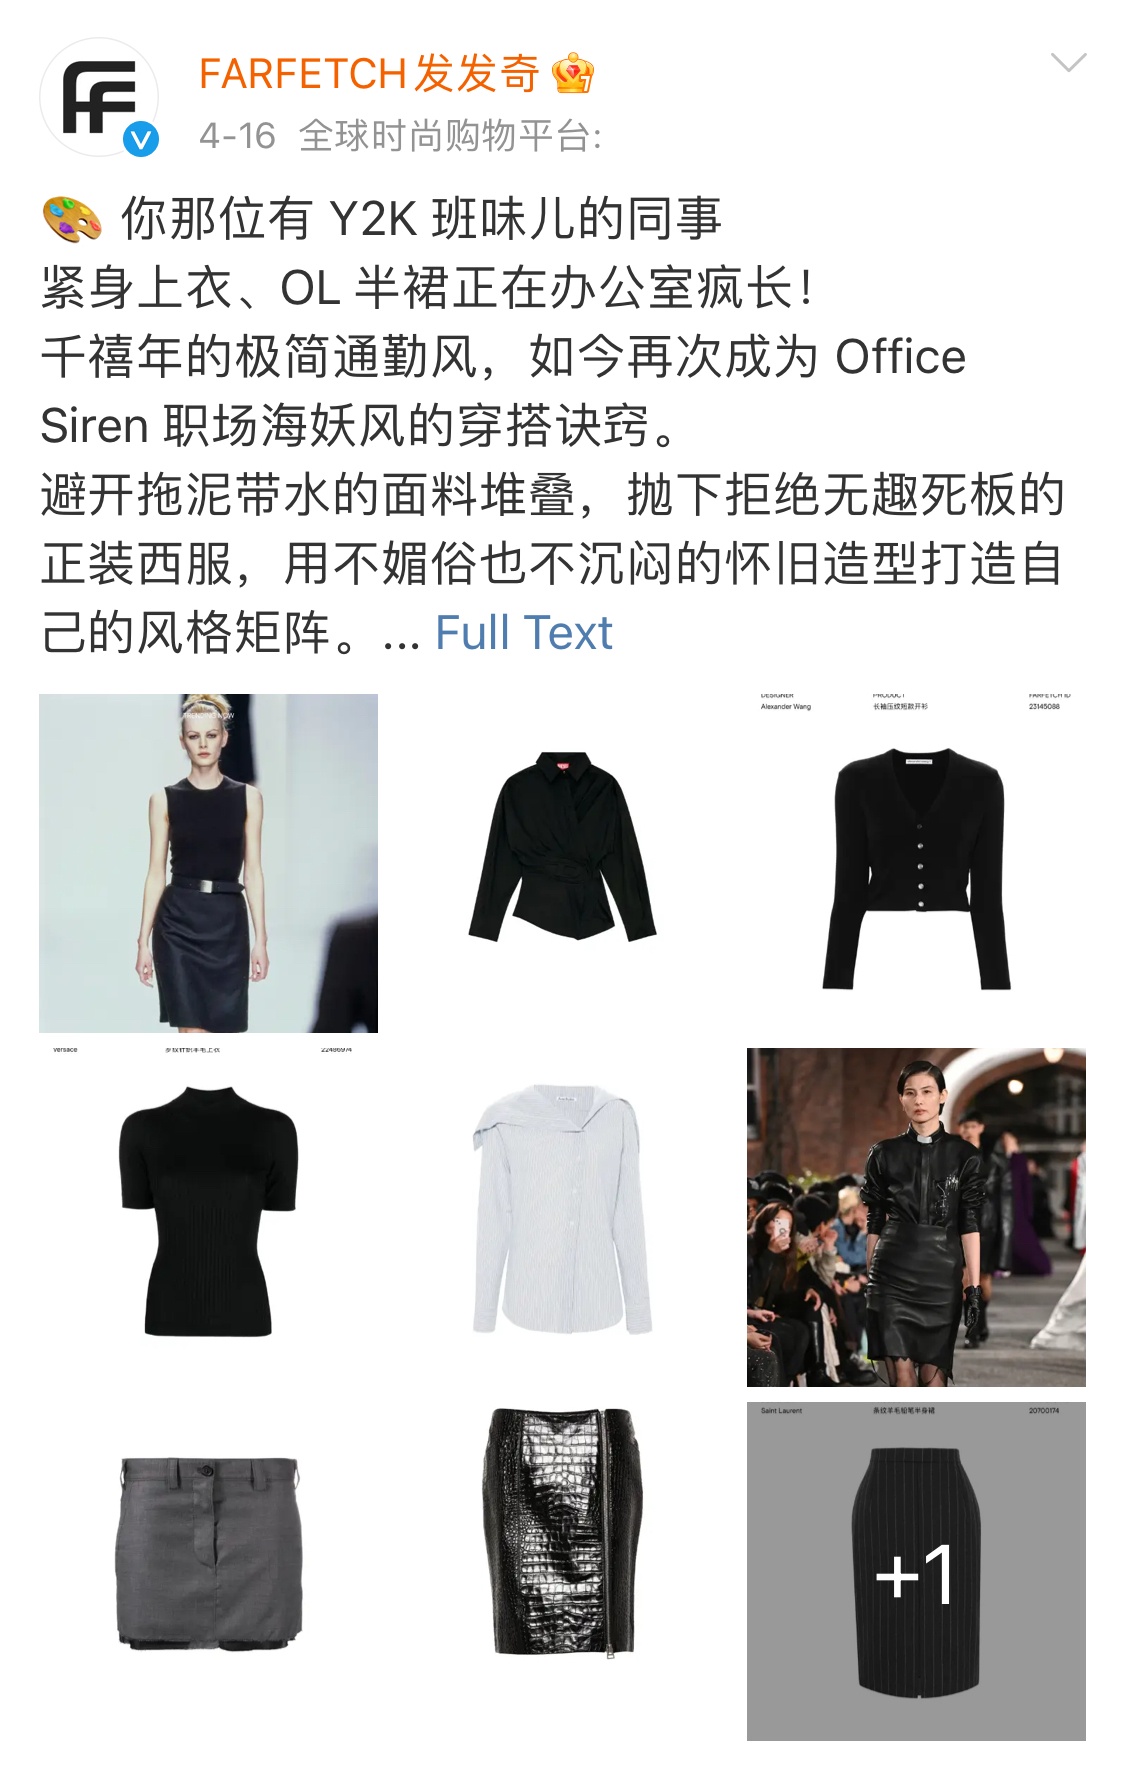 On Weibo, Farfetch uses the office siren trend to promote pieces from Tom Ford, Saint Laurent, and Miu Miu. Photo: Weibo